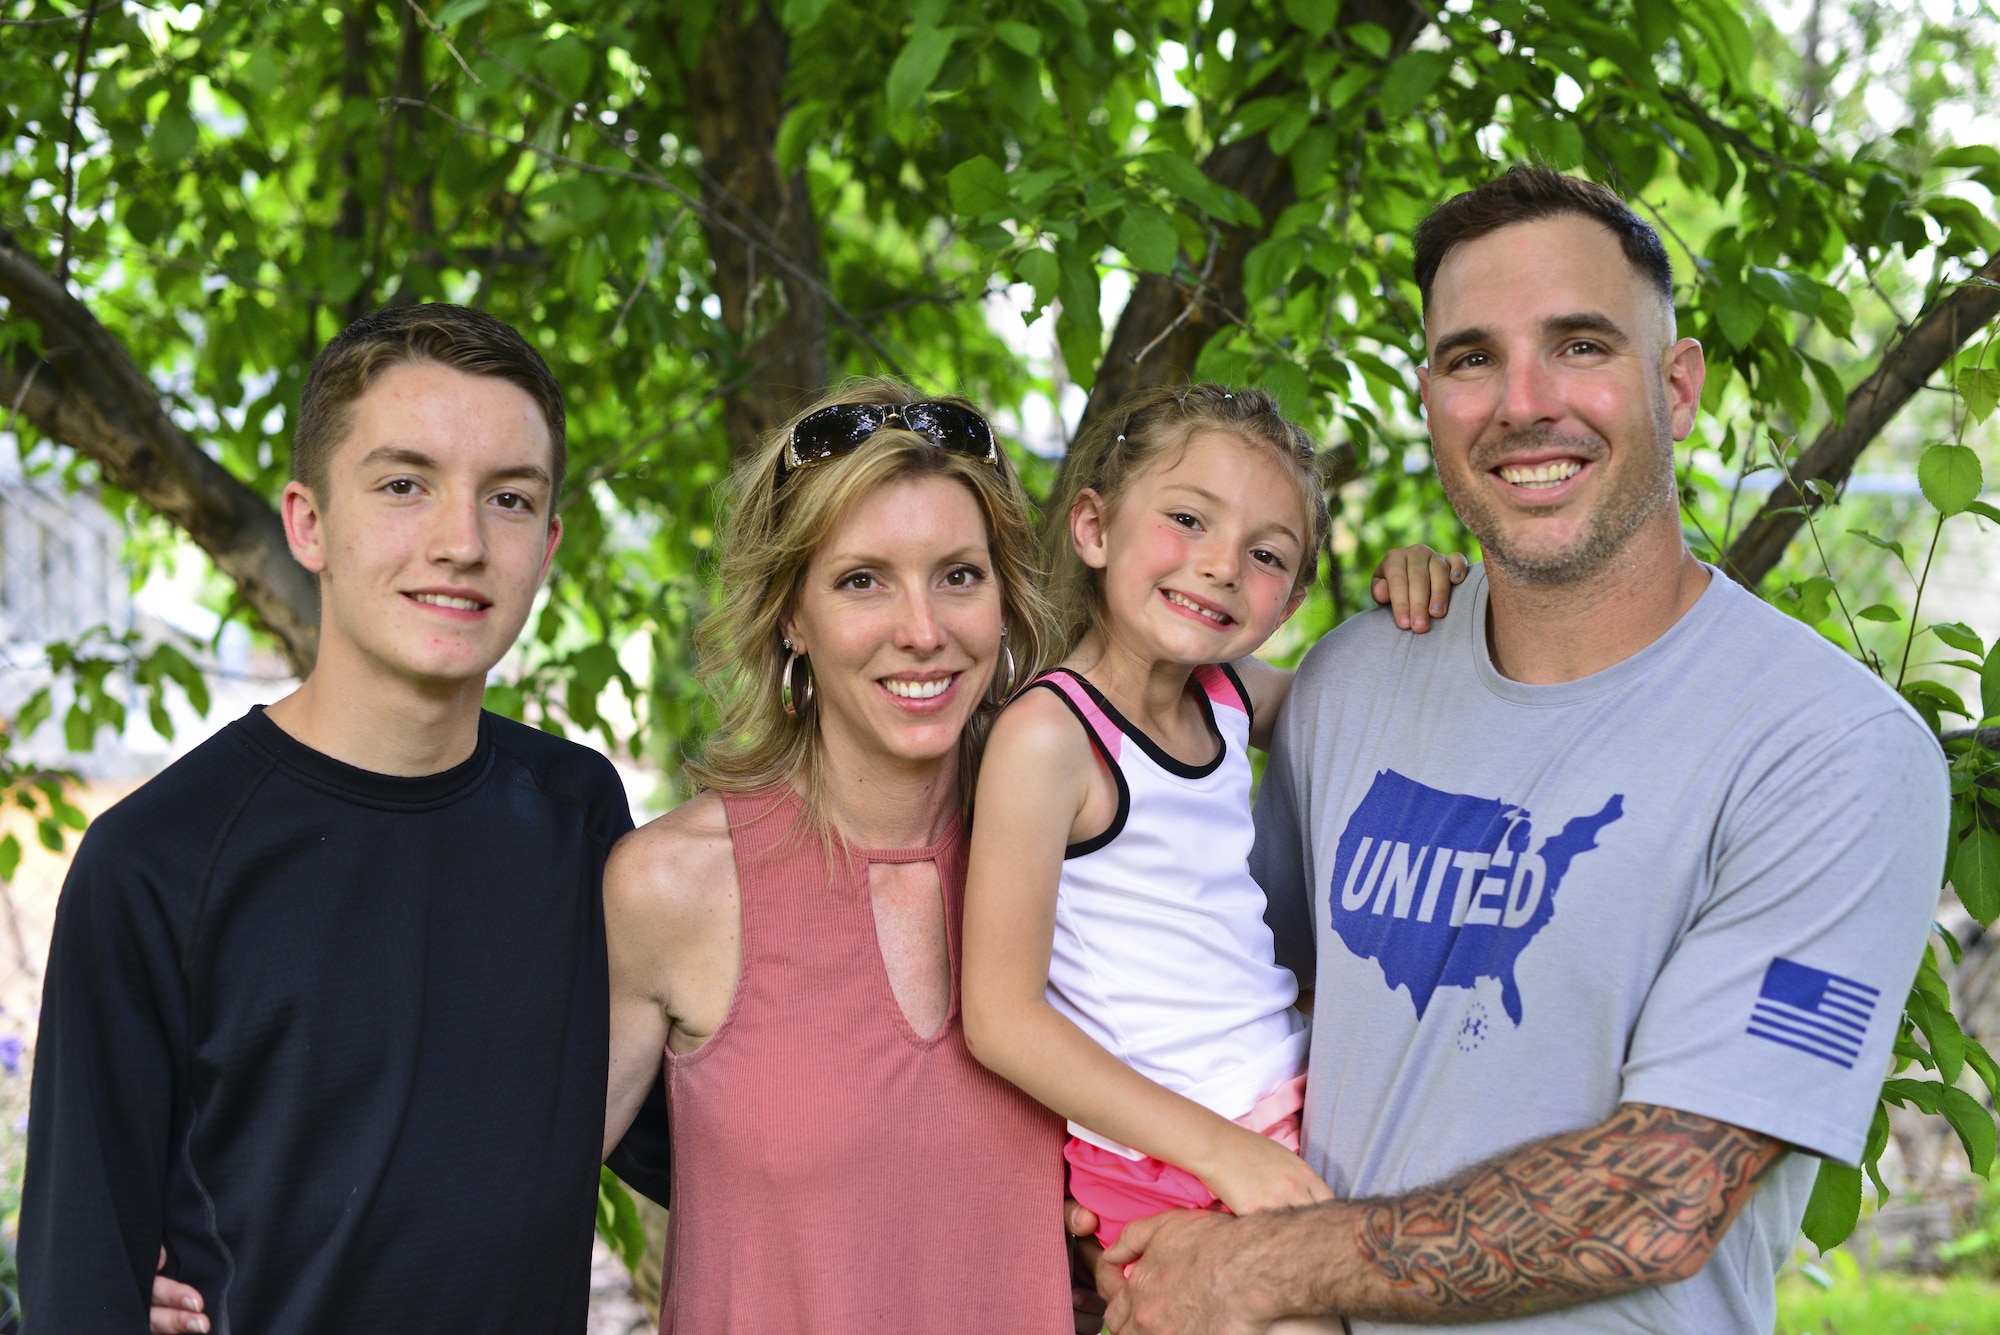 Senior Airman Christopher D’Angelo, a heavy equipment operator, has worked to recover from post-traumatic stress disorder with the help of his family.